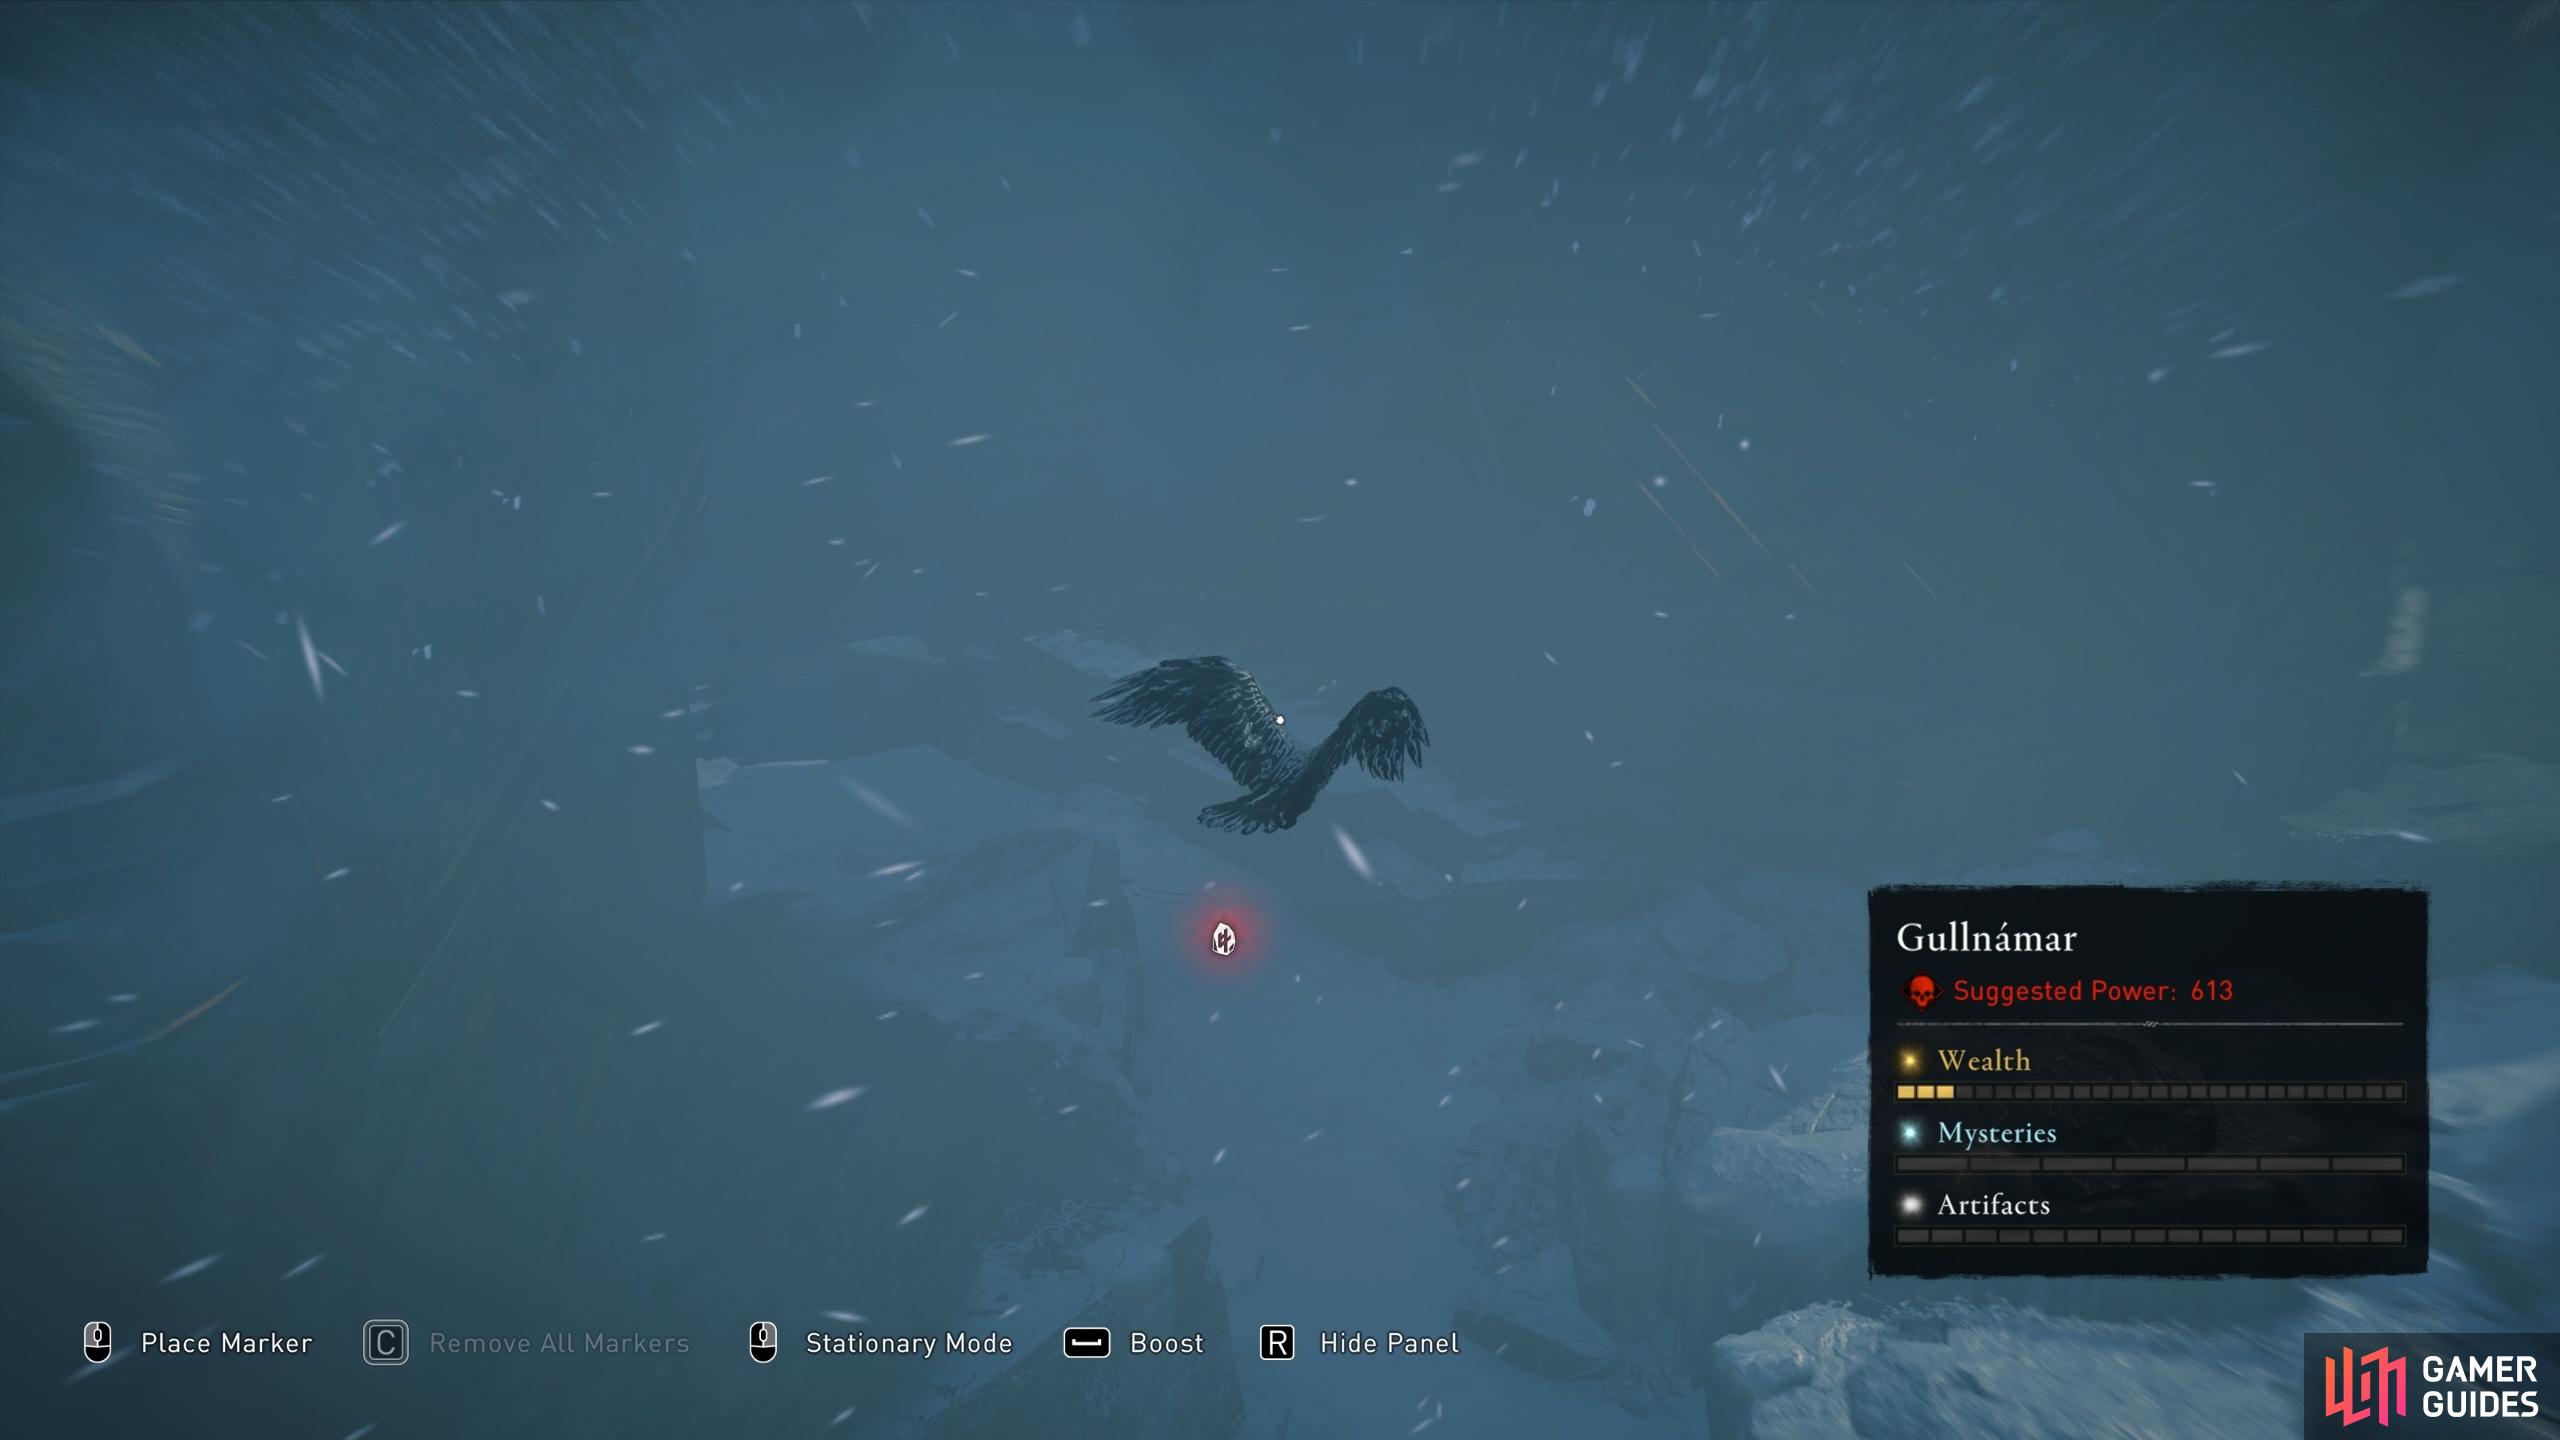 You can use your raven to scout for the exactly location of the first skull within the blight.